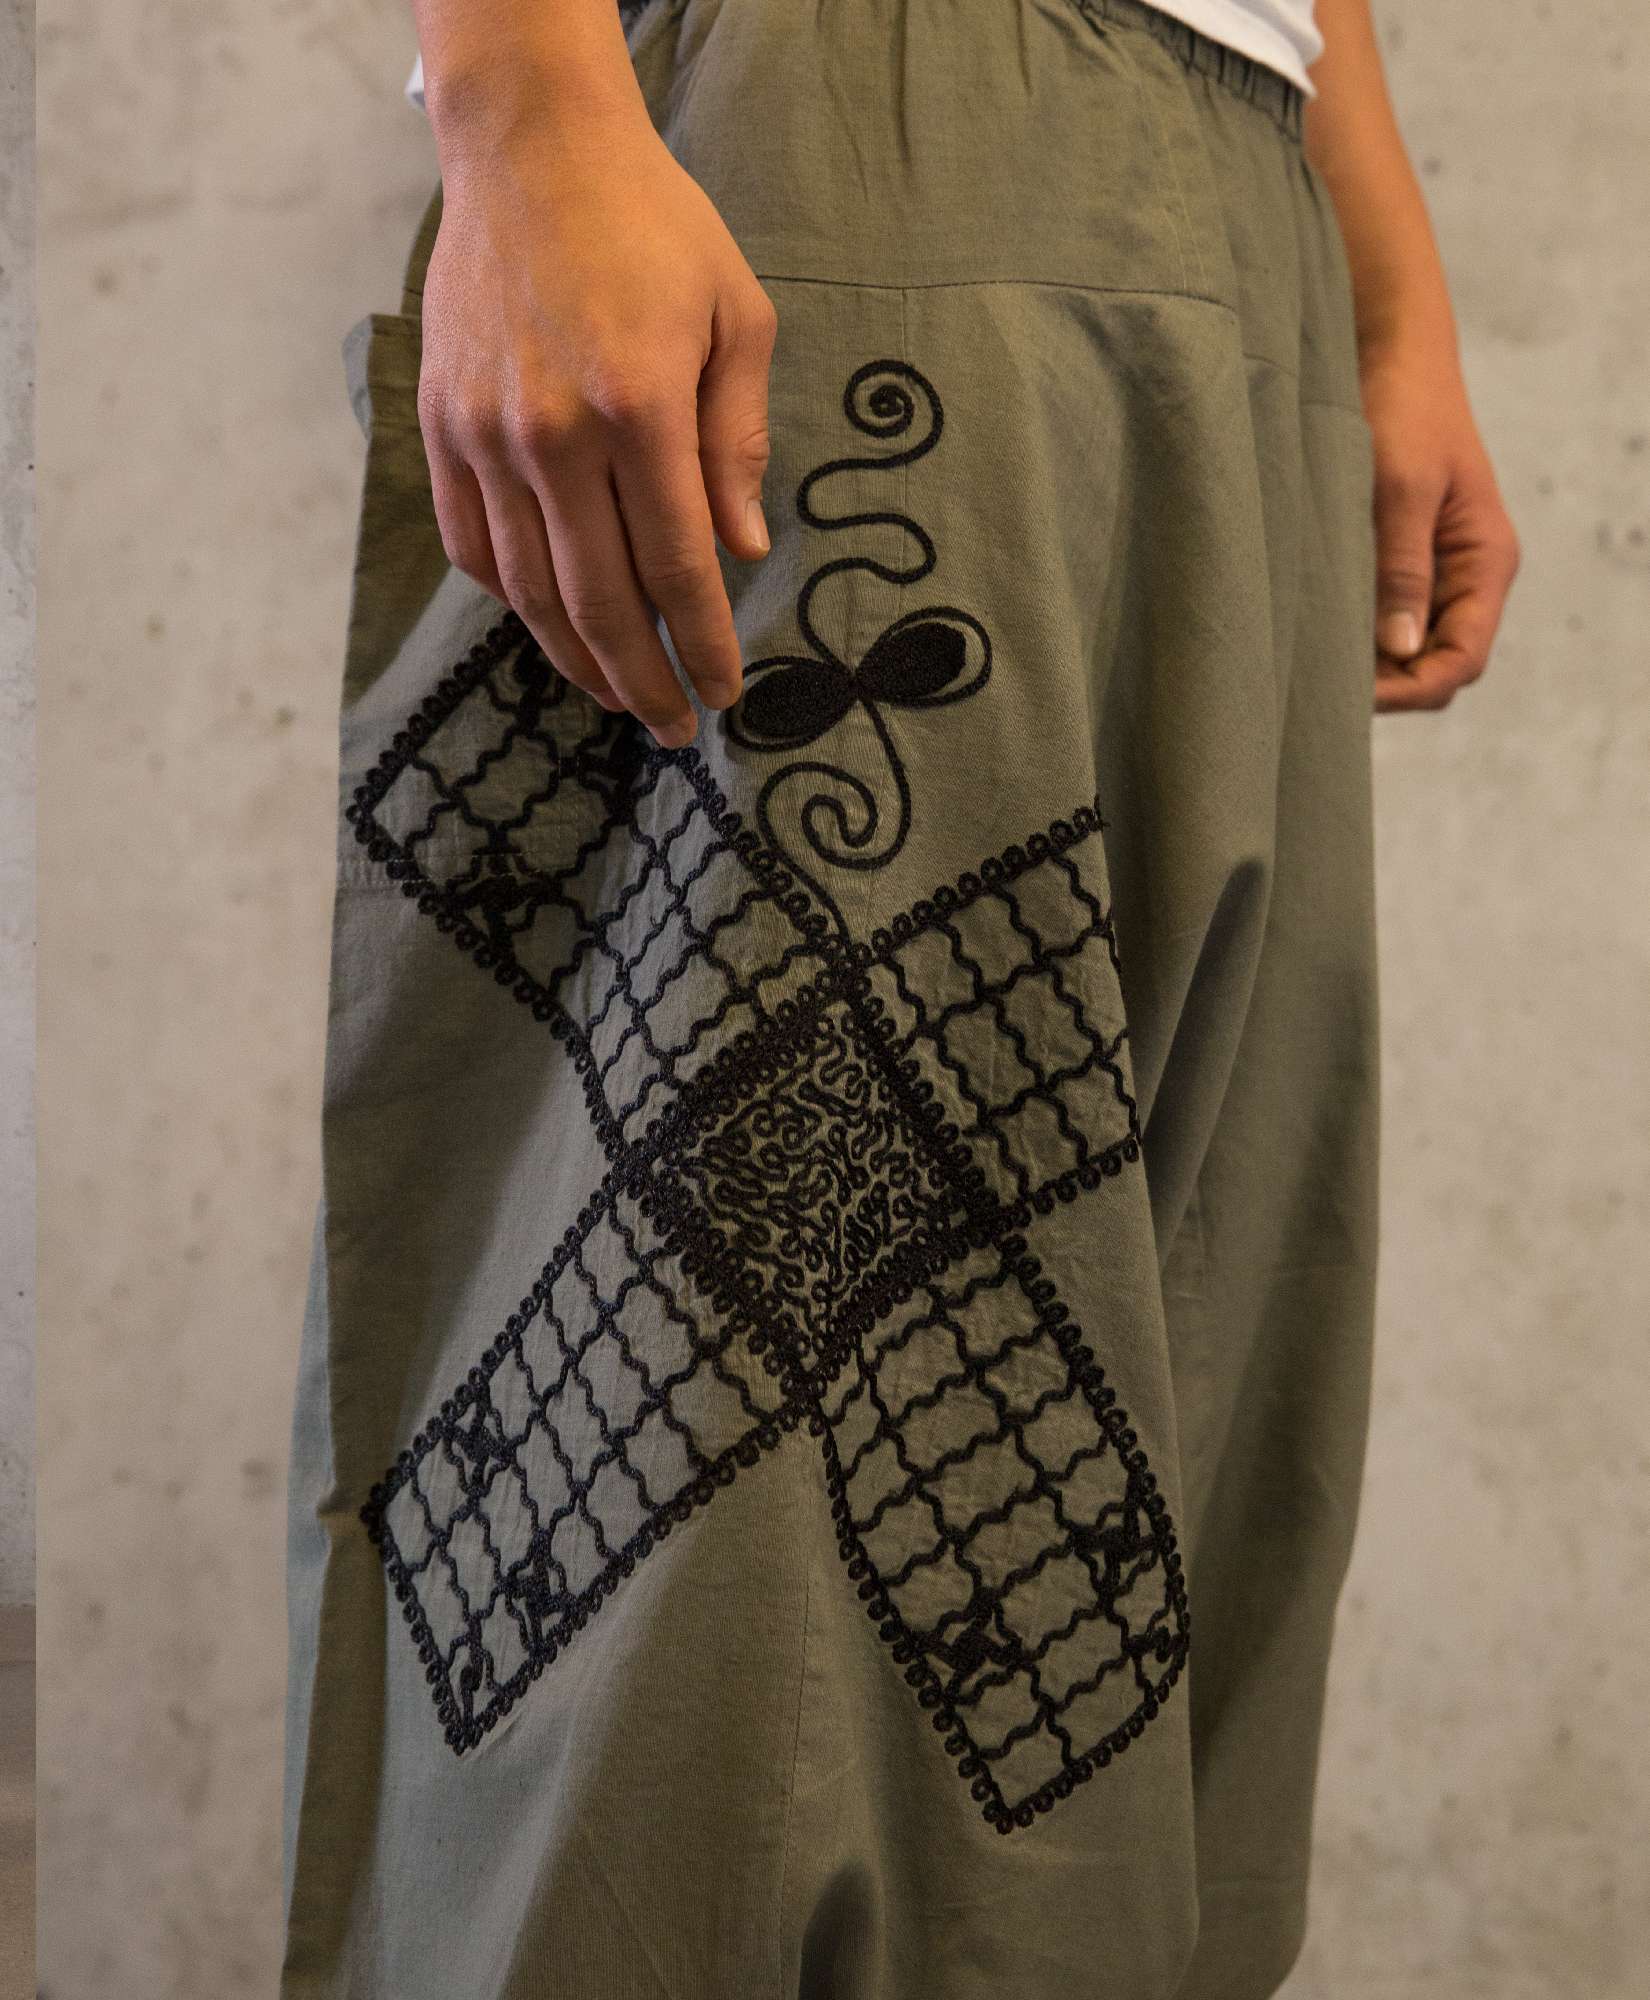 Cotton Kaki Embroidered Harem Pants + Traditional Barjees Board Game / Stitched Sarouel